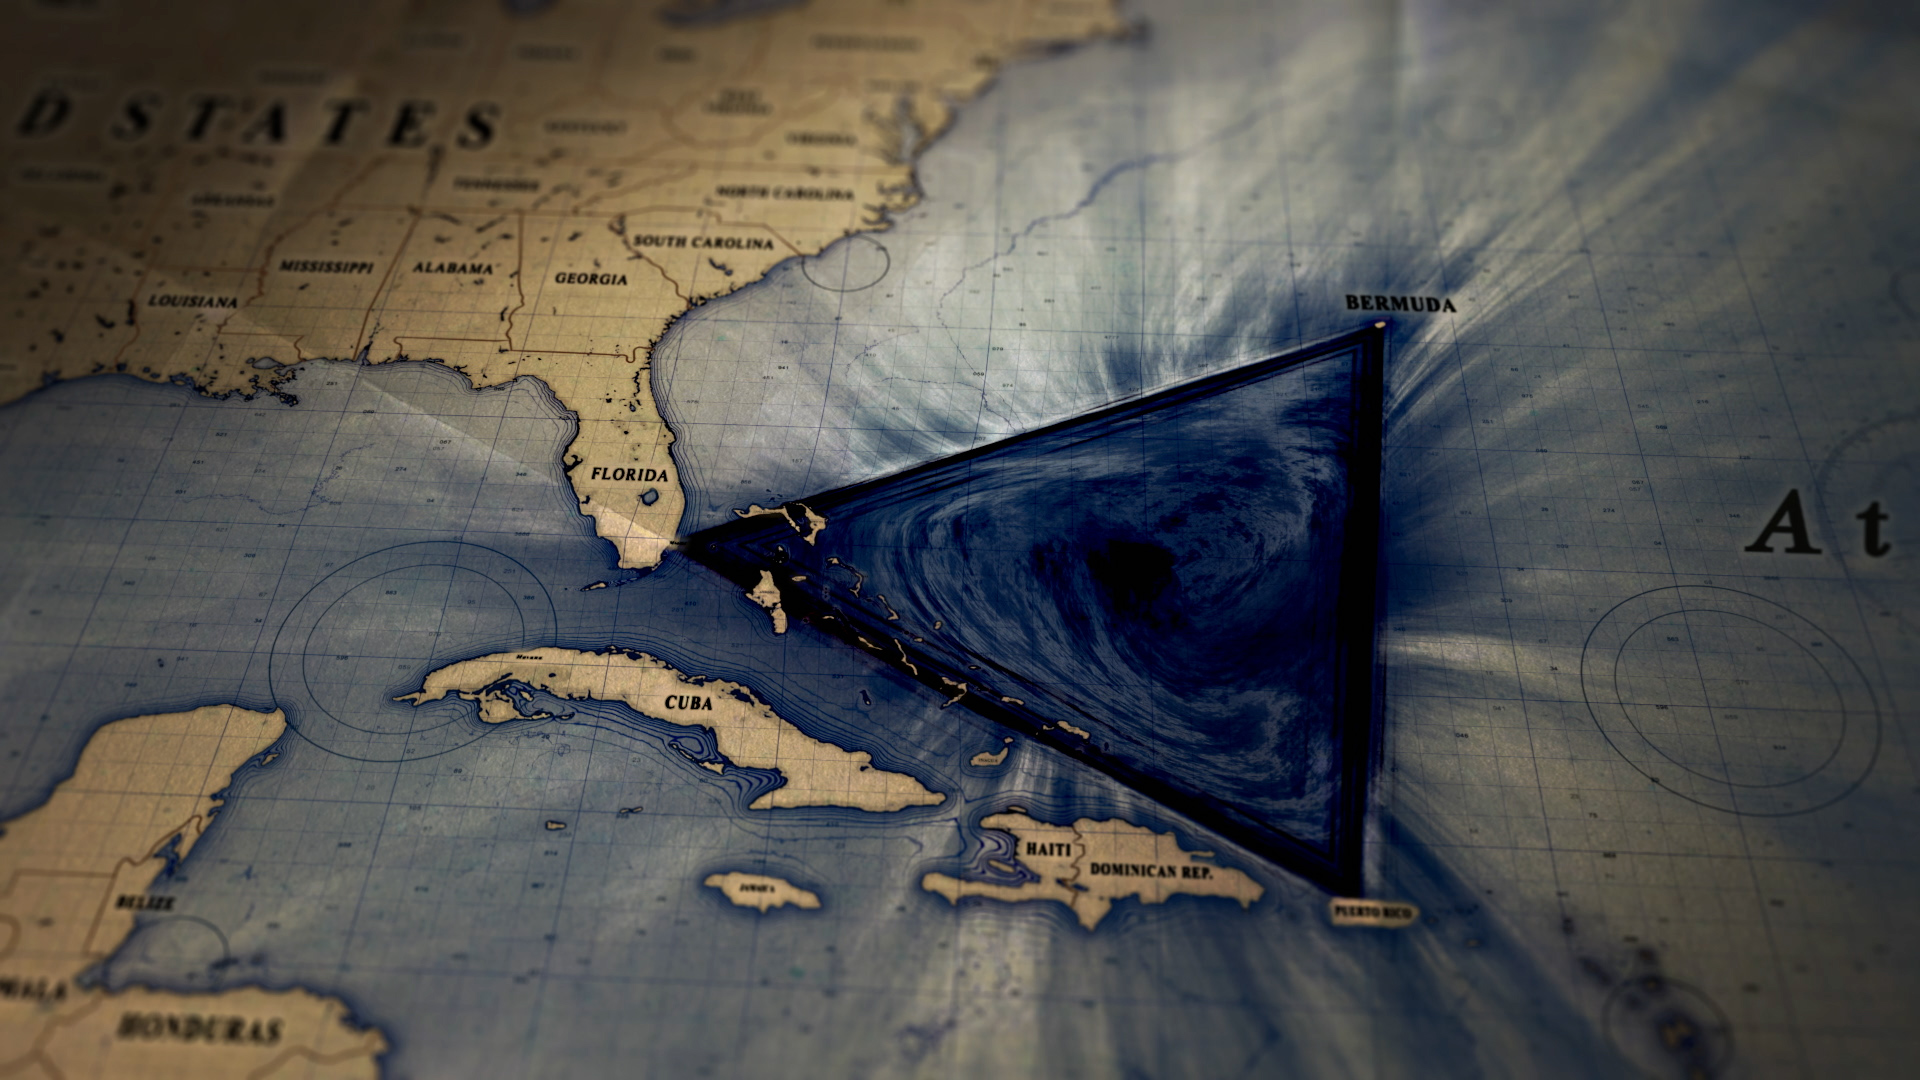 Unsolved Mystery of Disappearance of the USS Cyclops in the Bermuda Triangle